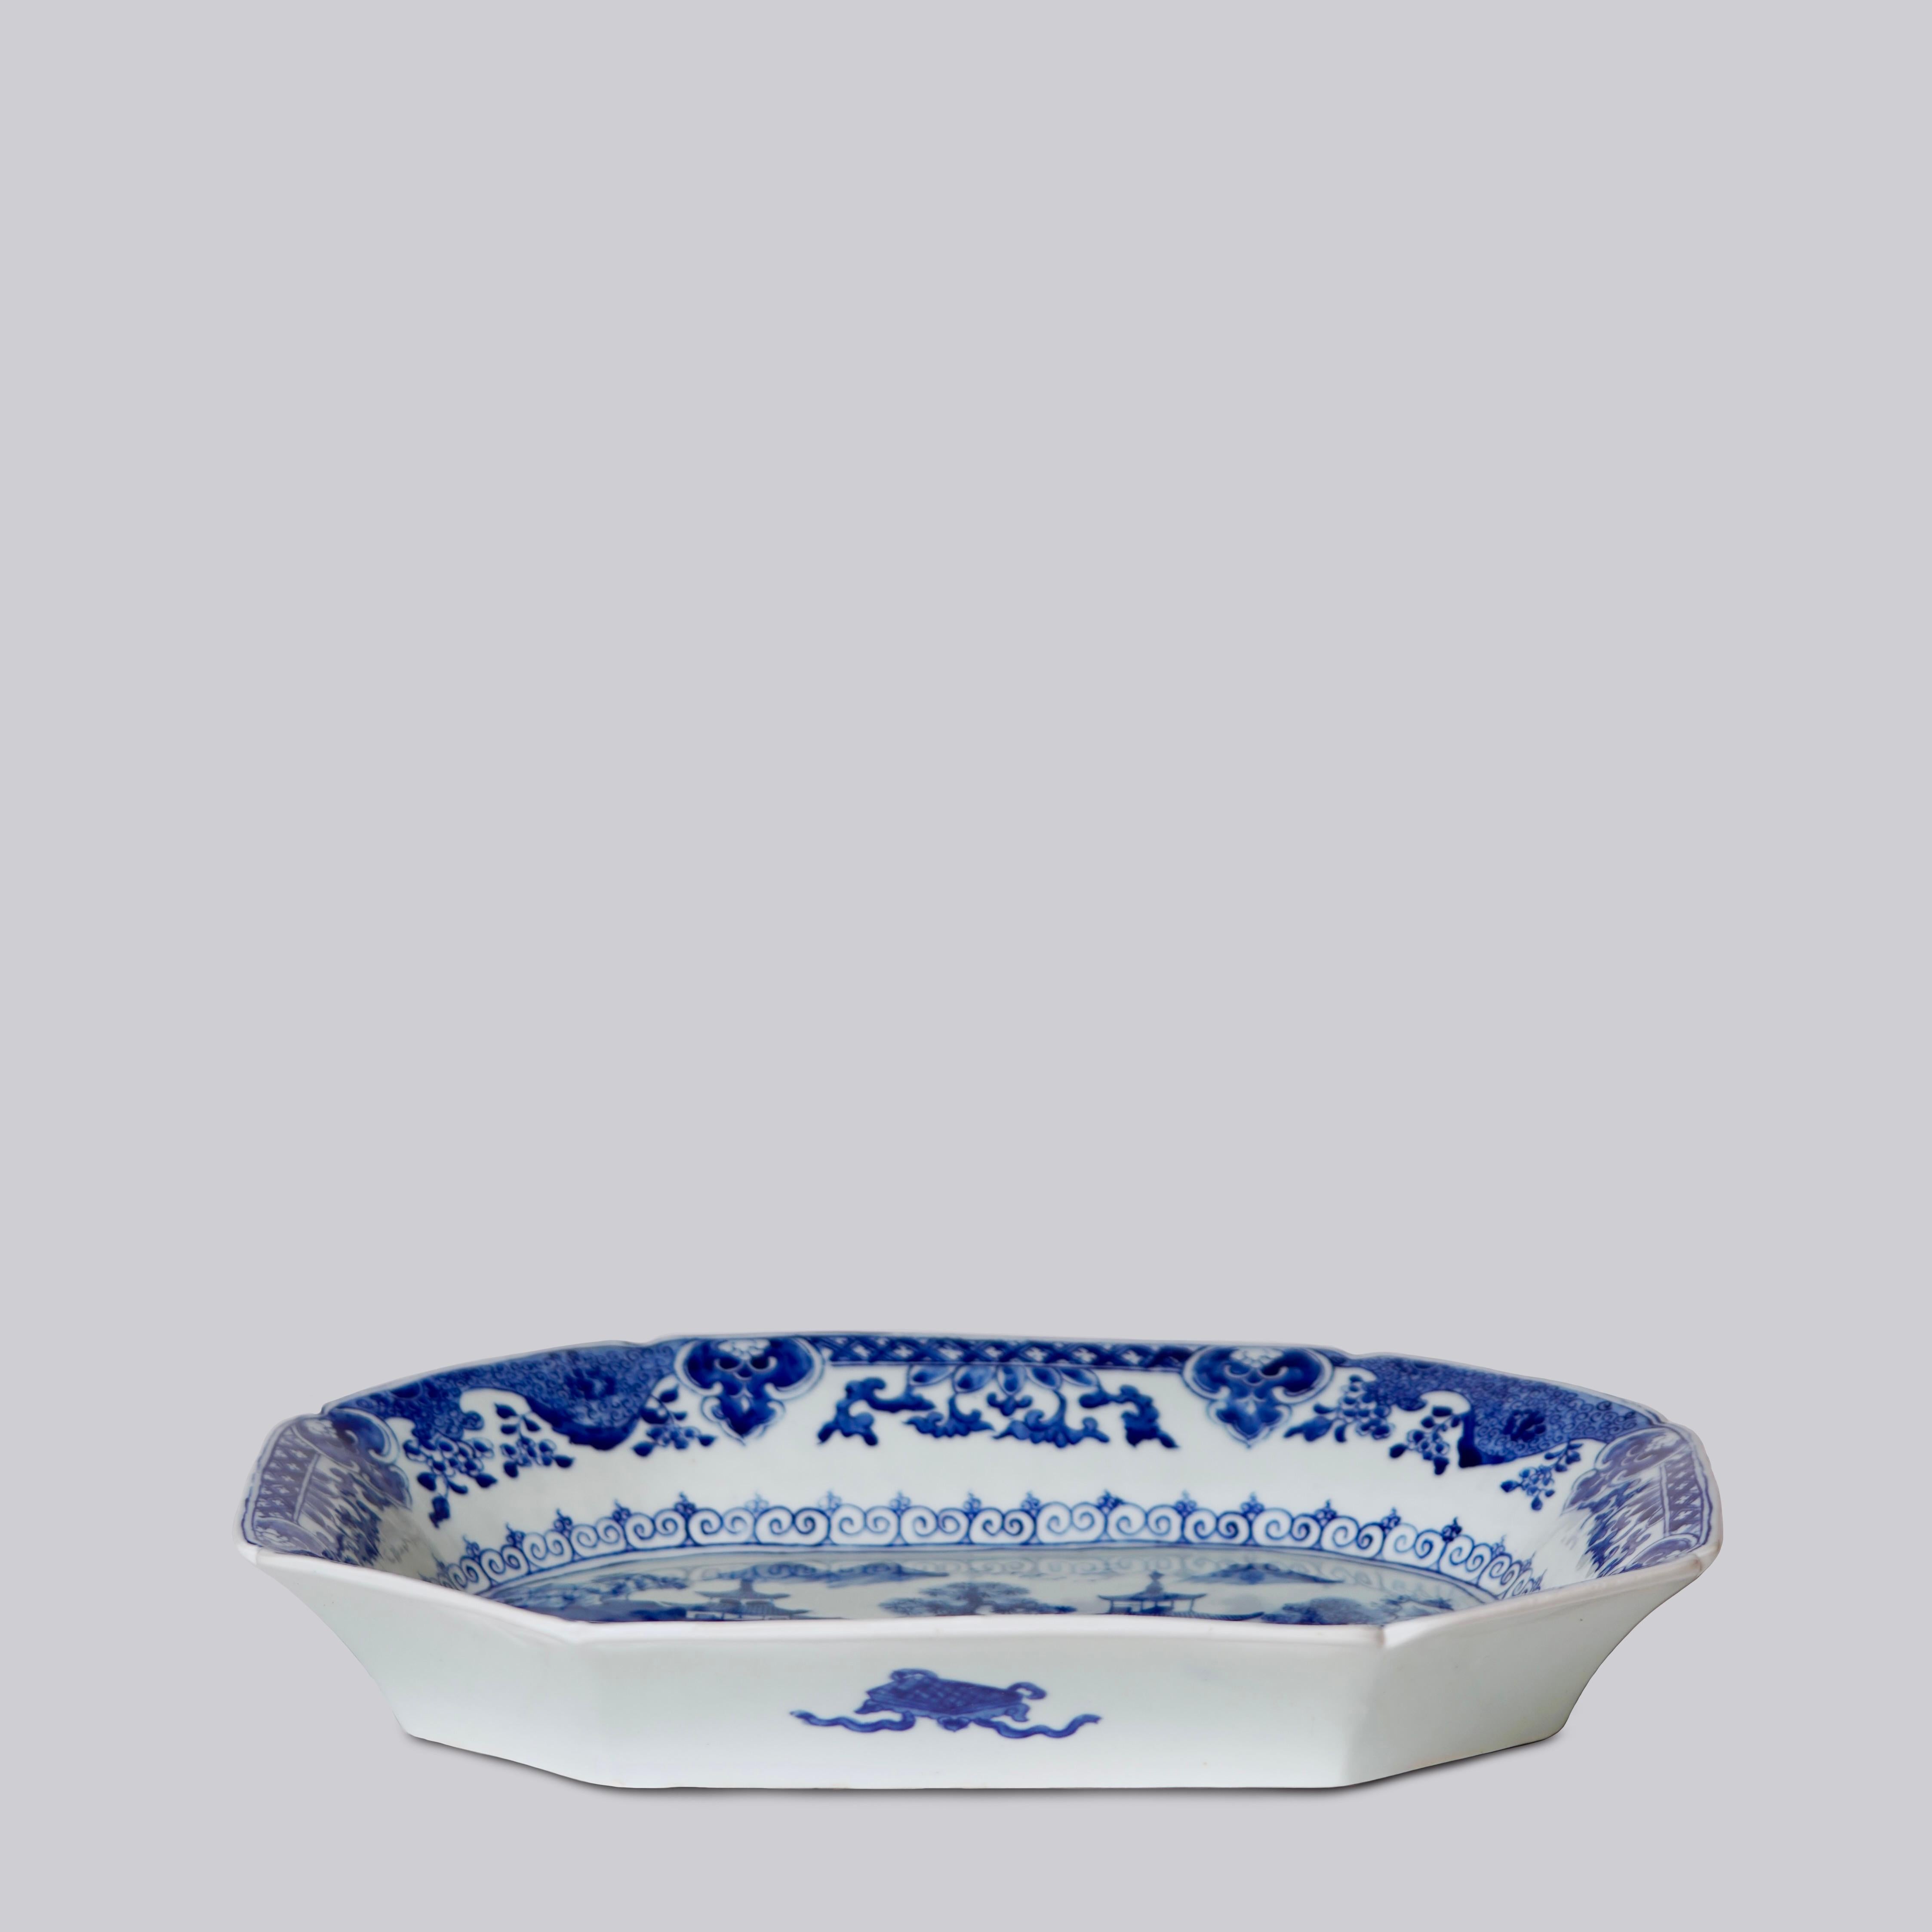 Chinese Export Medium Blue and White Willow Ware Octagonal Porcelain Platter For Sale